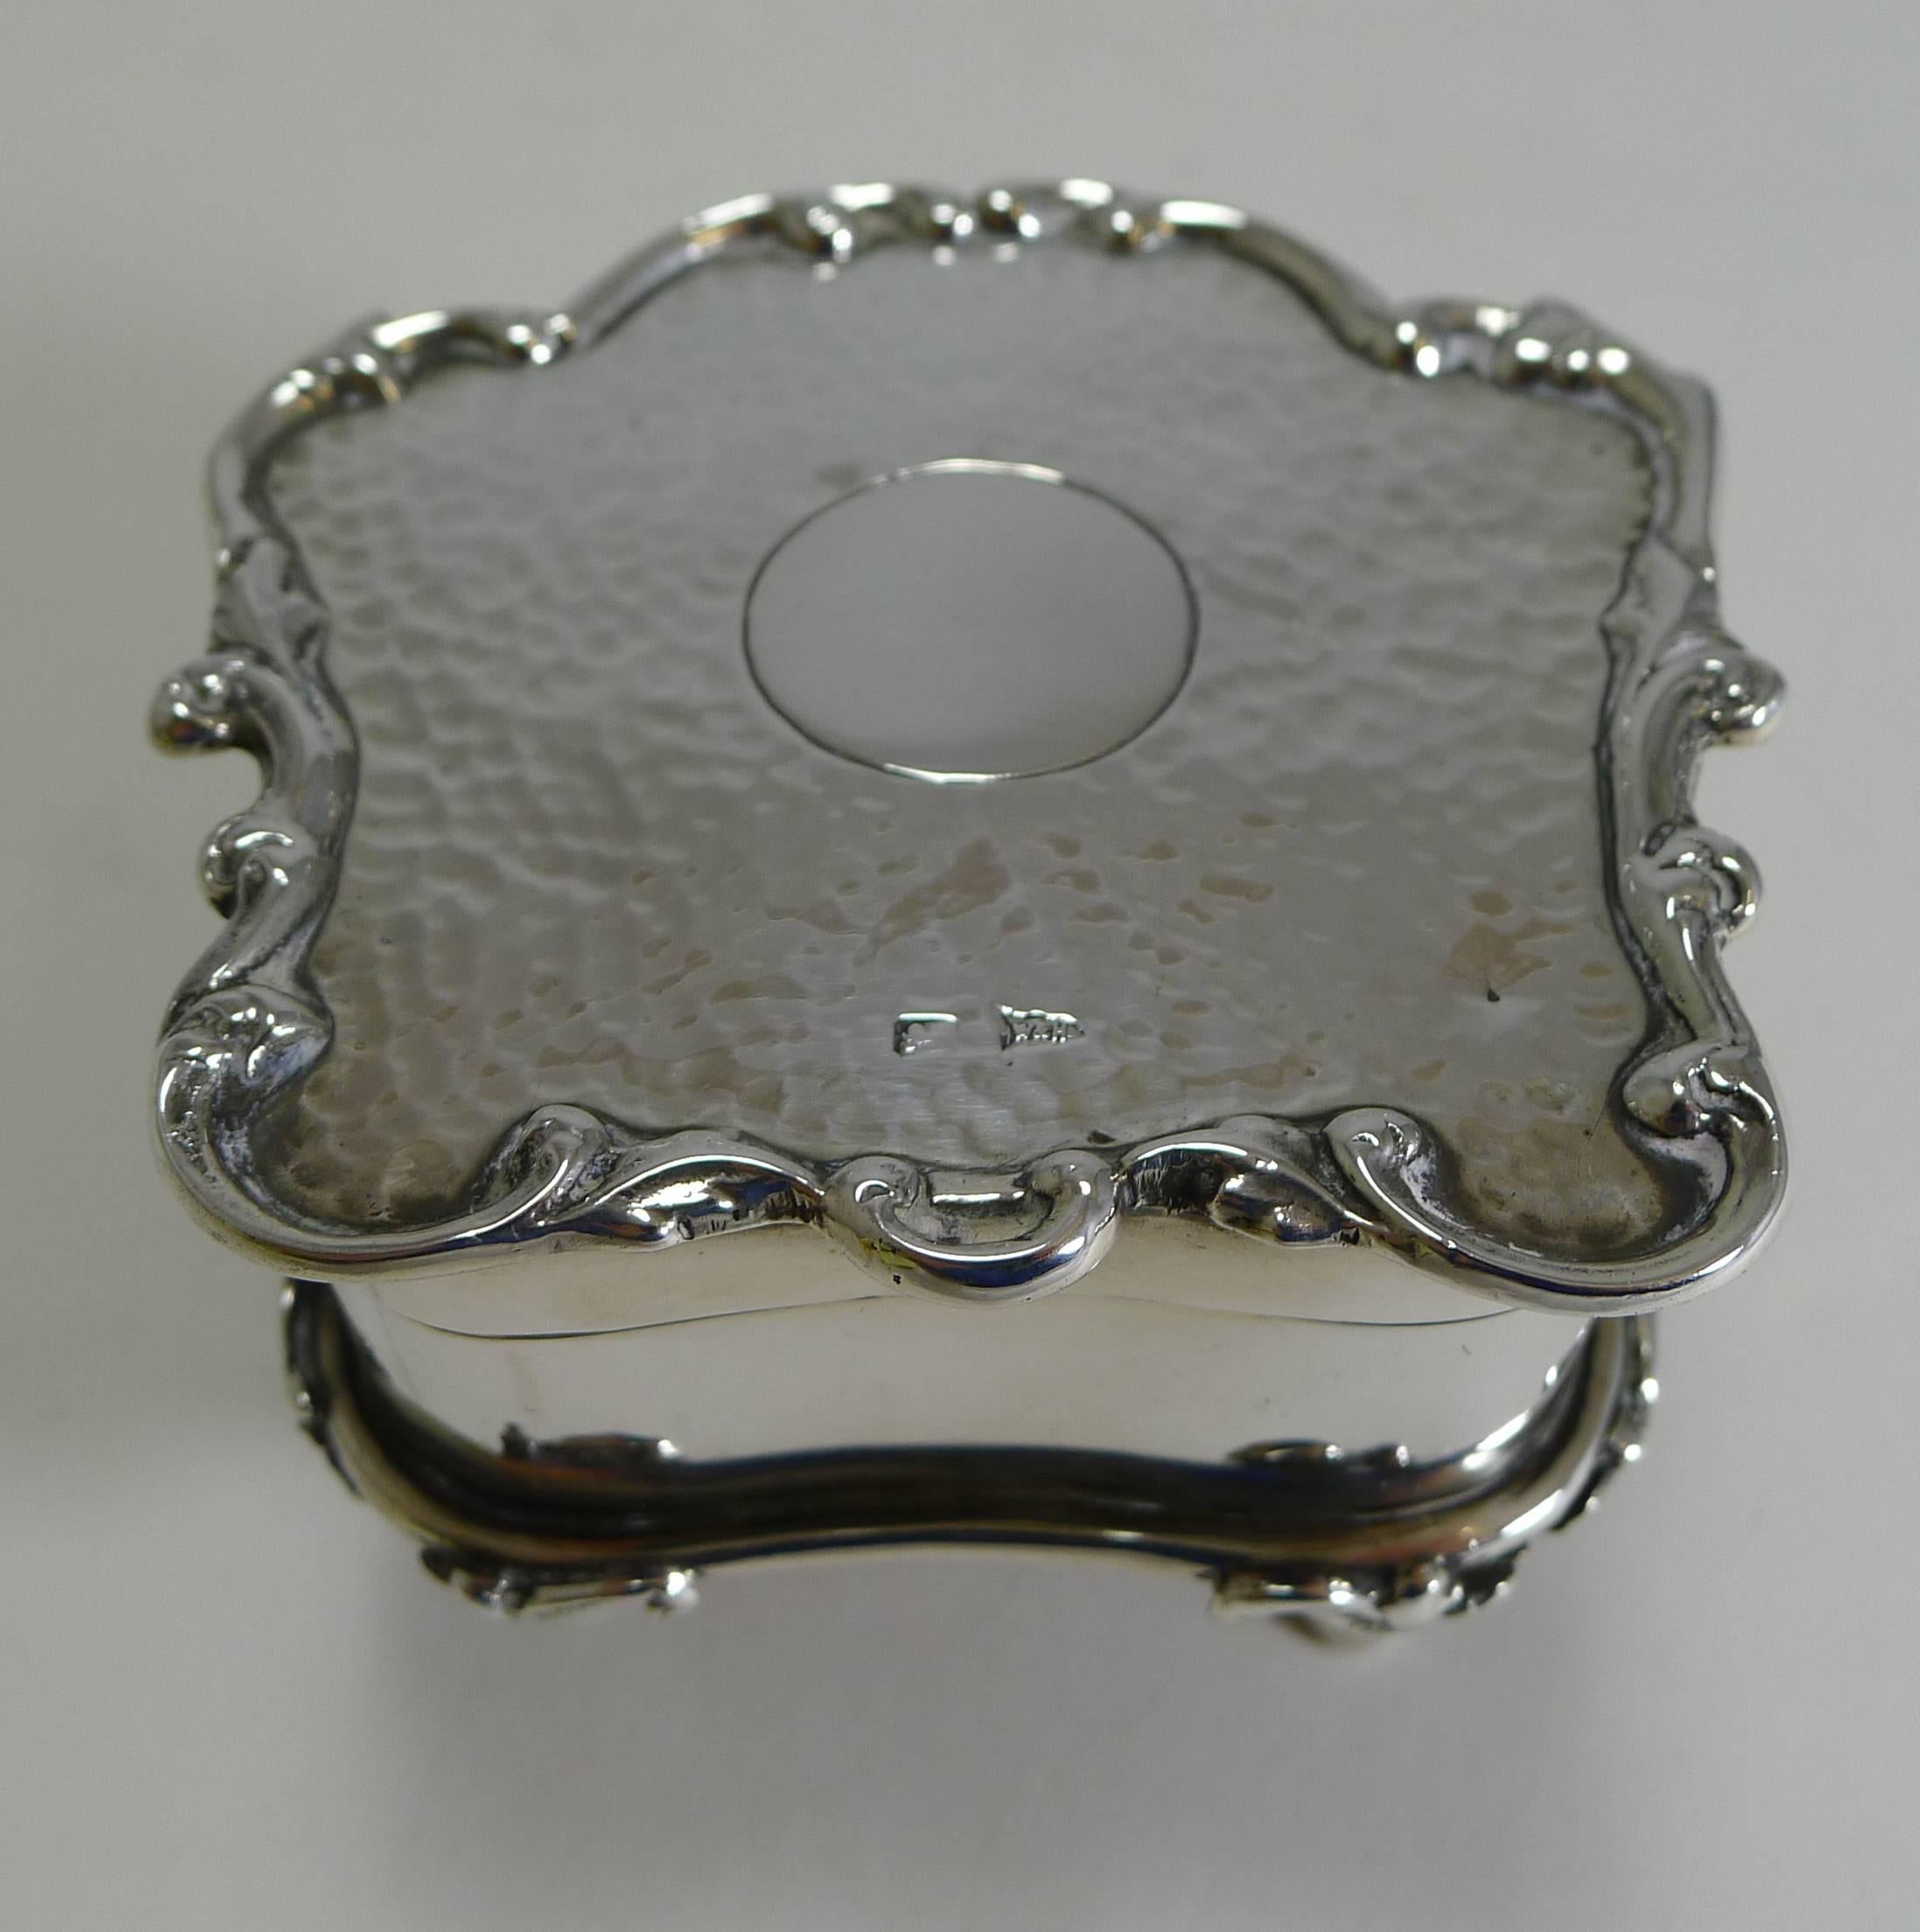 Edwardian Antique English Sterling Silver Jewelry Box by Walker and Hall